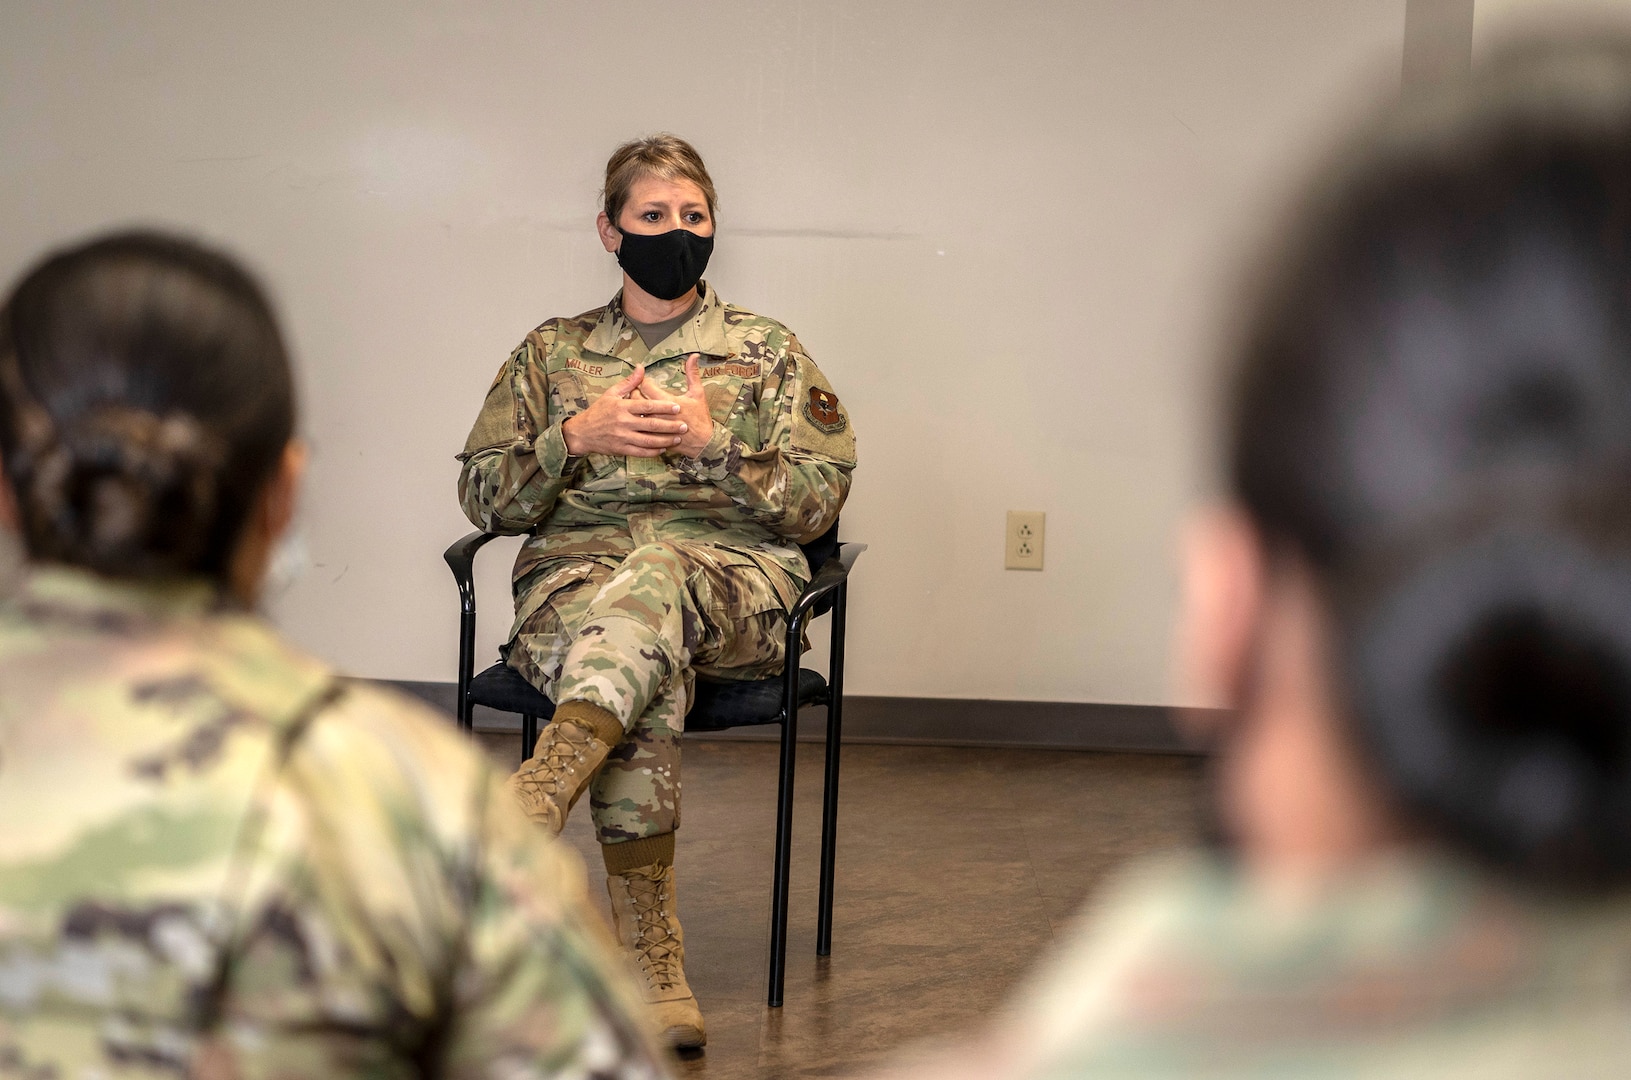 Brig. Gen. Caroline Miller, 502d and JBSA wing commander, and Command Chief Master Sgt. Wendell Snider met with a group of Airmen and civilian employees to discuss "Unconscious Bias" during the command's Tough Conversation Roundtable July 21, 2020 at Joint Base San Antonio, Texas.